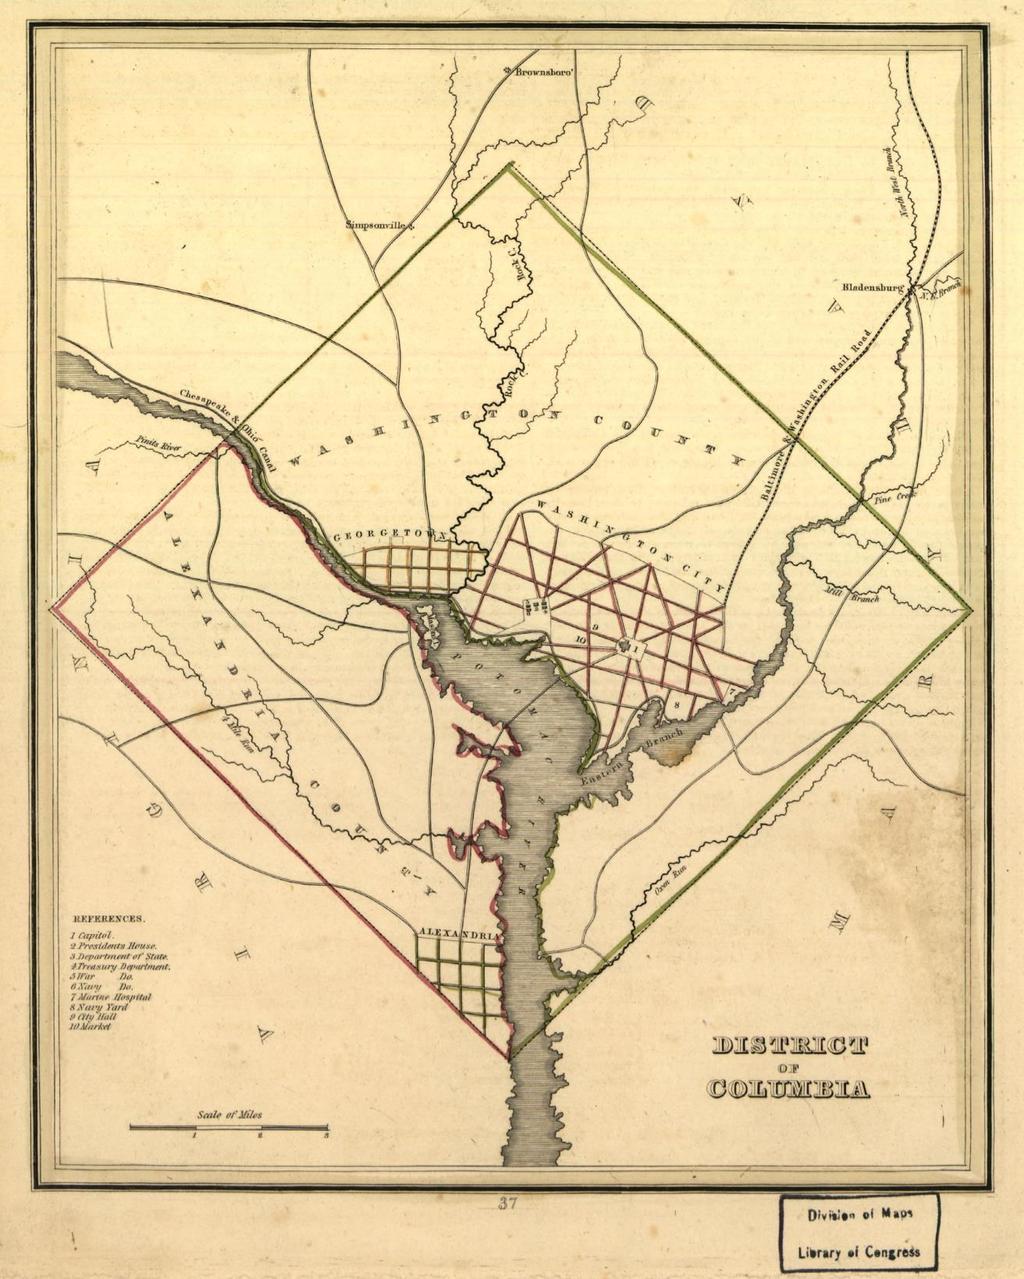 The original District of Columbia was diamond-shaped, and was made up of land